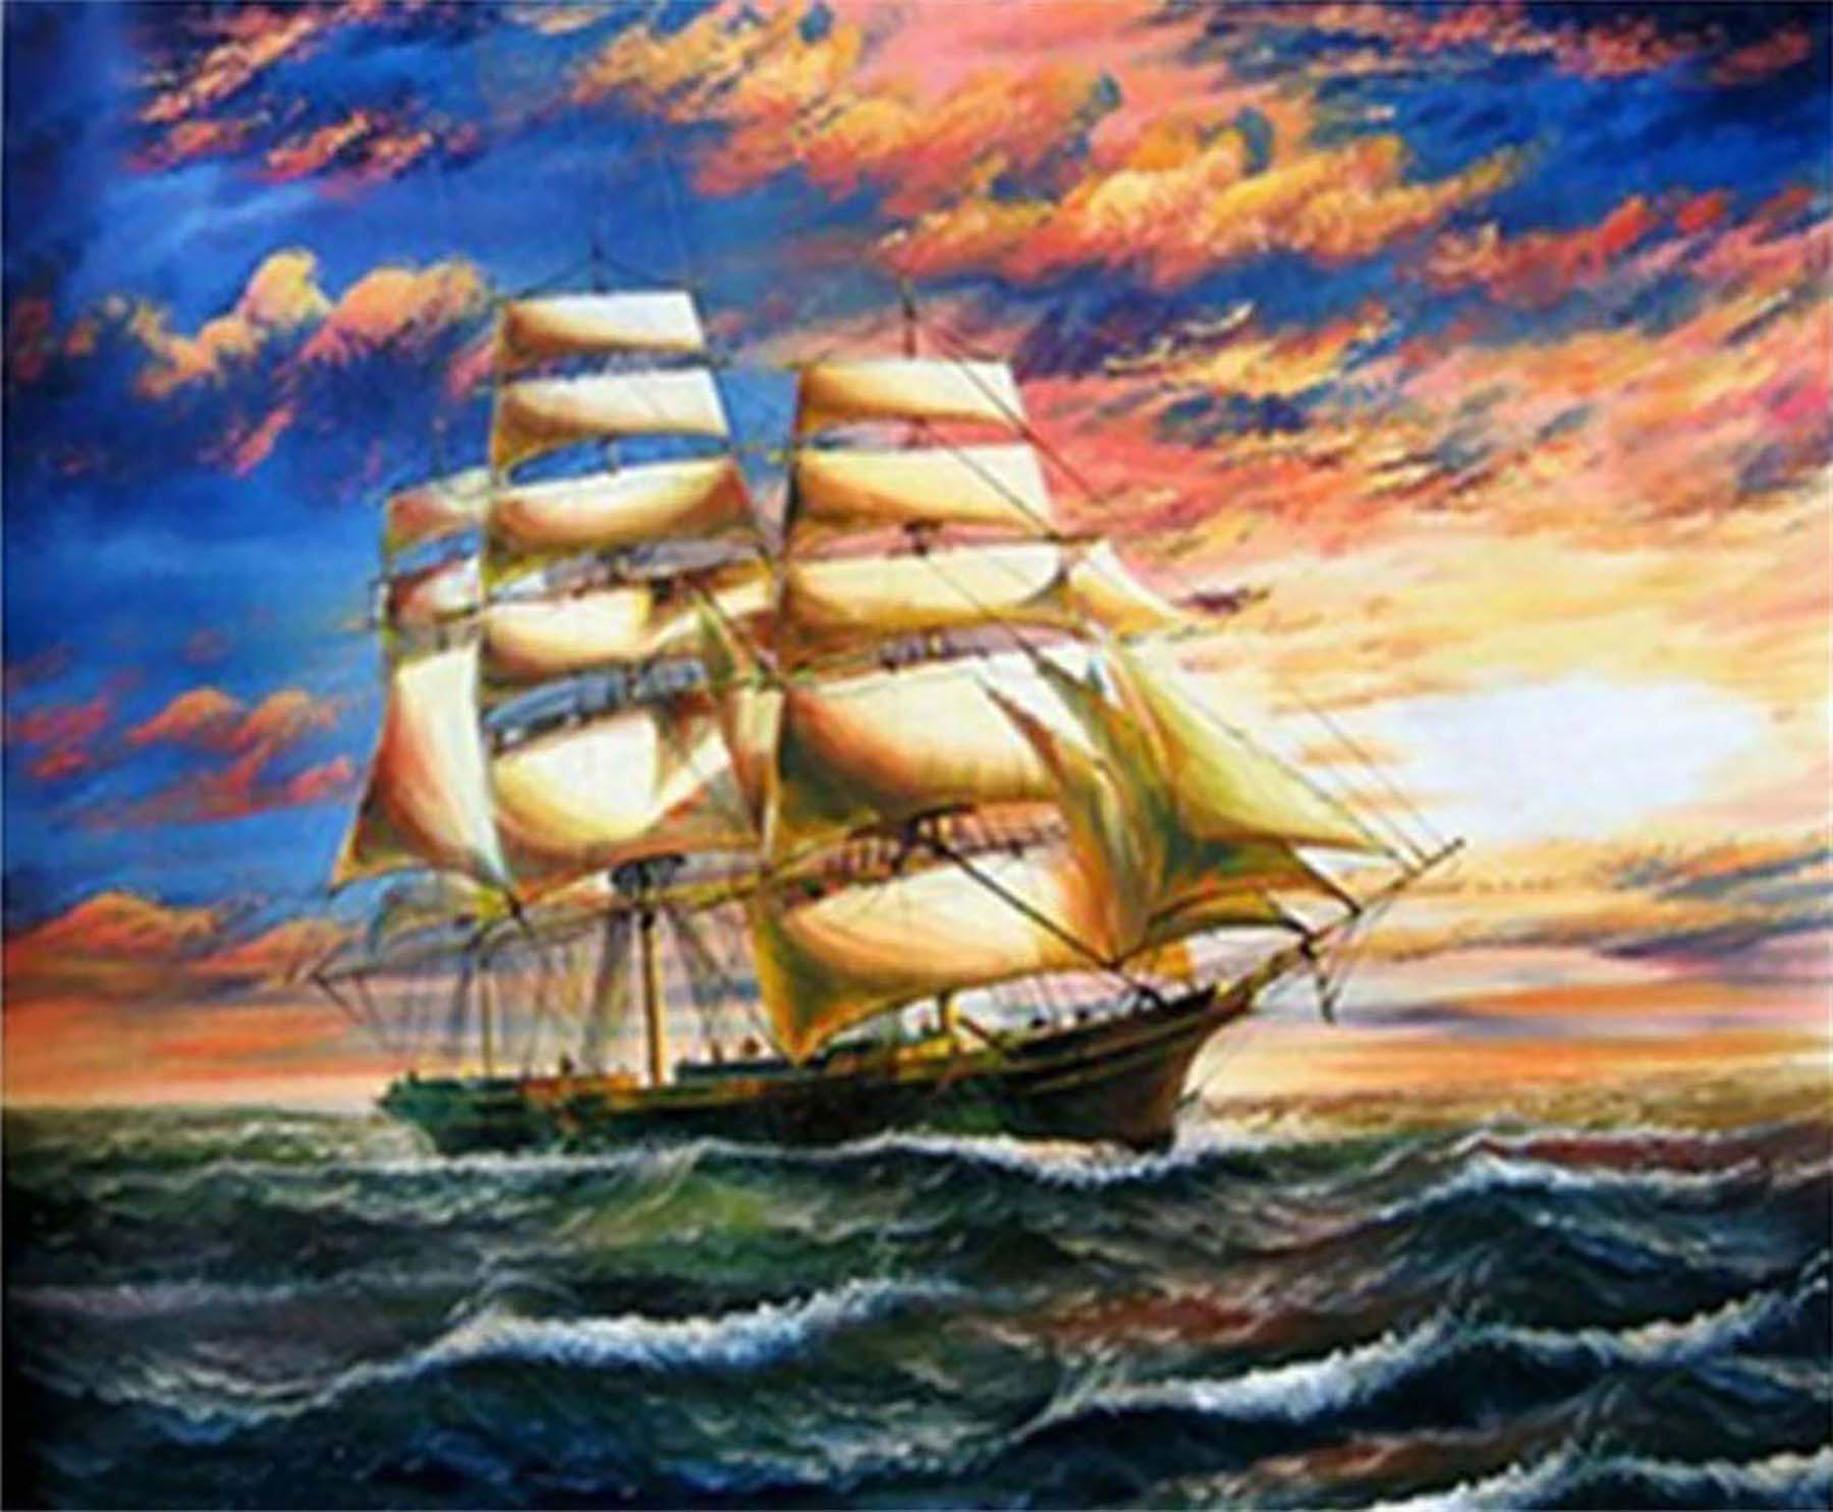 Bimkole 5D Diamond Painting Sea Sailing Full Drill by Number Kits DIY Rhinestone Pasted 12x16inch